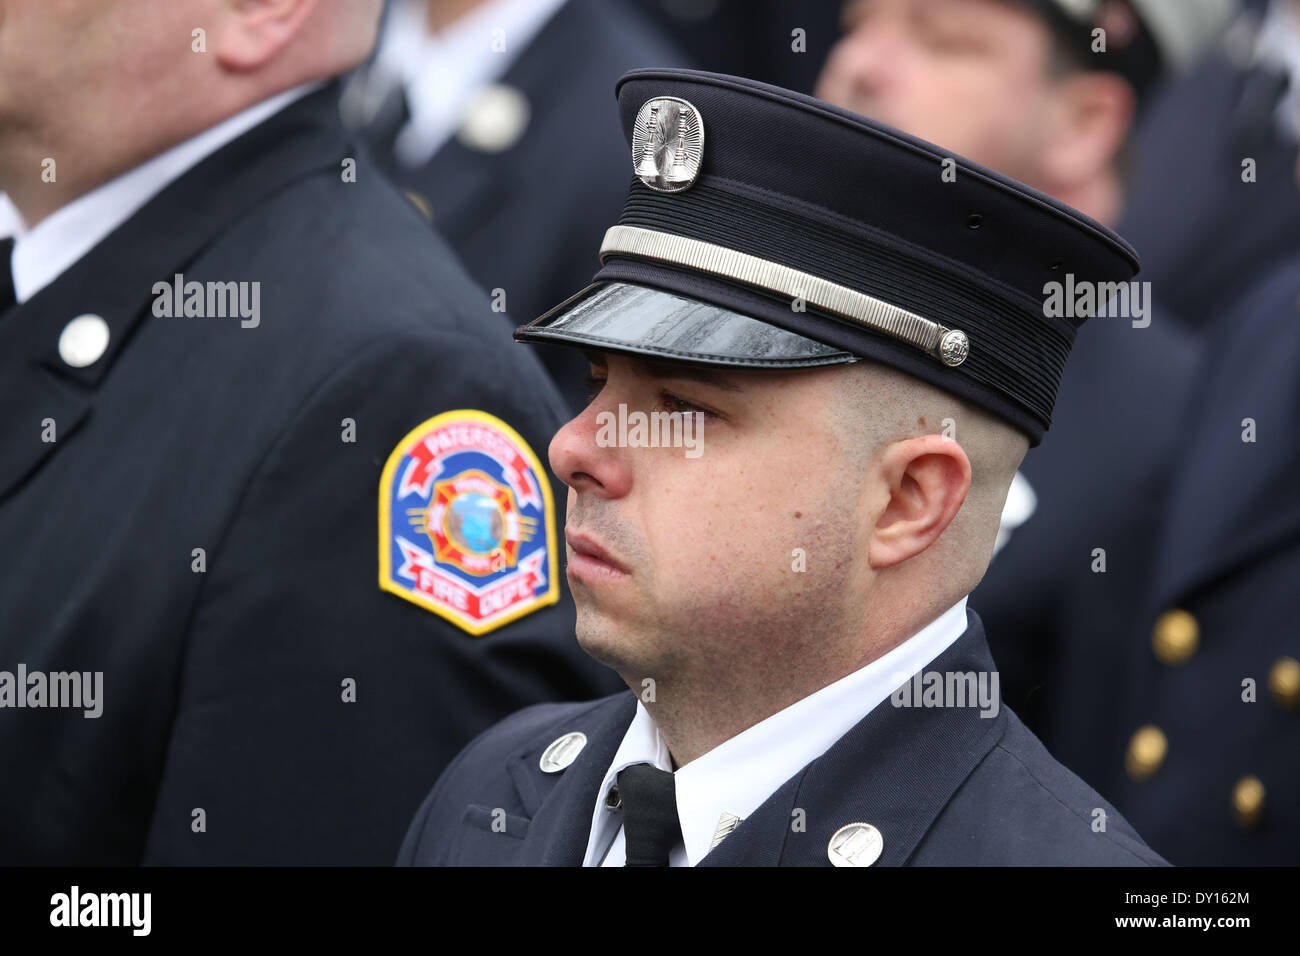 Watertown, Massachusetts, USA. 2nd Apr, 2014. Thousands of firefighters from across the nation gathered outside the Church of Saint Patrick in Watertown, Massachusetts to attend the funeral of fallen Boston Firefighter Lieutenant Edward Walsh. Walsh and fellow firefighter Michael Kennedy died in a nine -alarm blaze at 298 Beacon Street in Boston, Massachusetts. Credit:  Nicolaus Czarnecki/METRO Boston/ZUMAPRESS.com/Alamy Live News Stock Photo